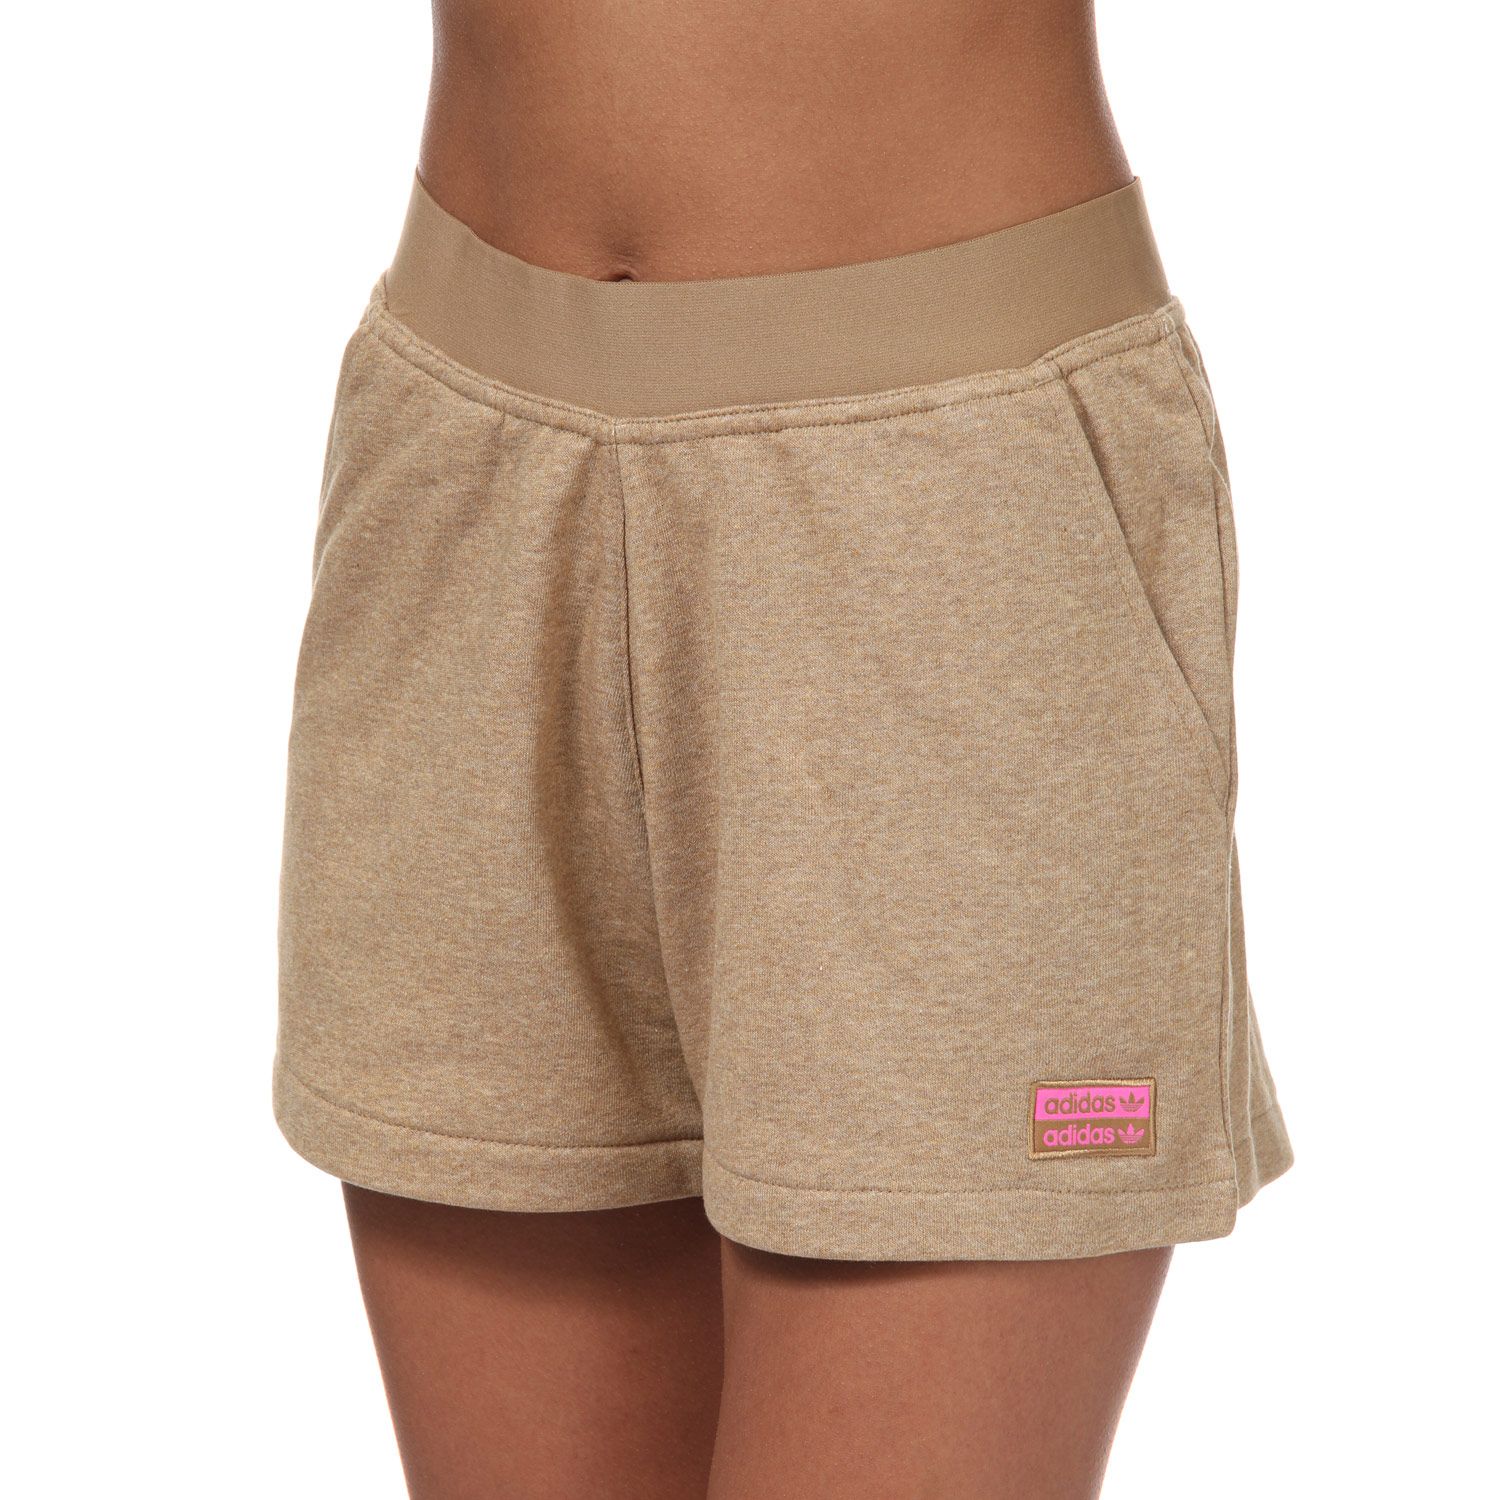 Womens Clothing Shorts Mini shorts Save 52% IRO Cotton High-rise Slim-fit Shorts in Pink 